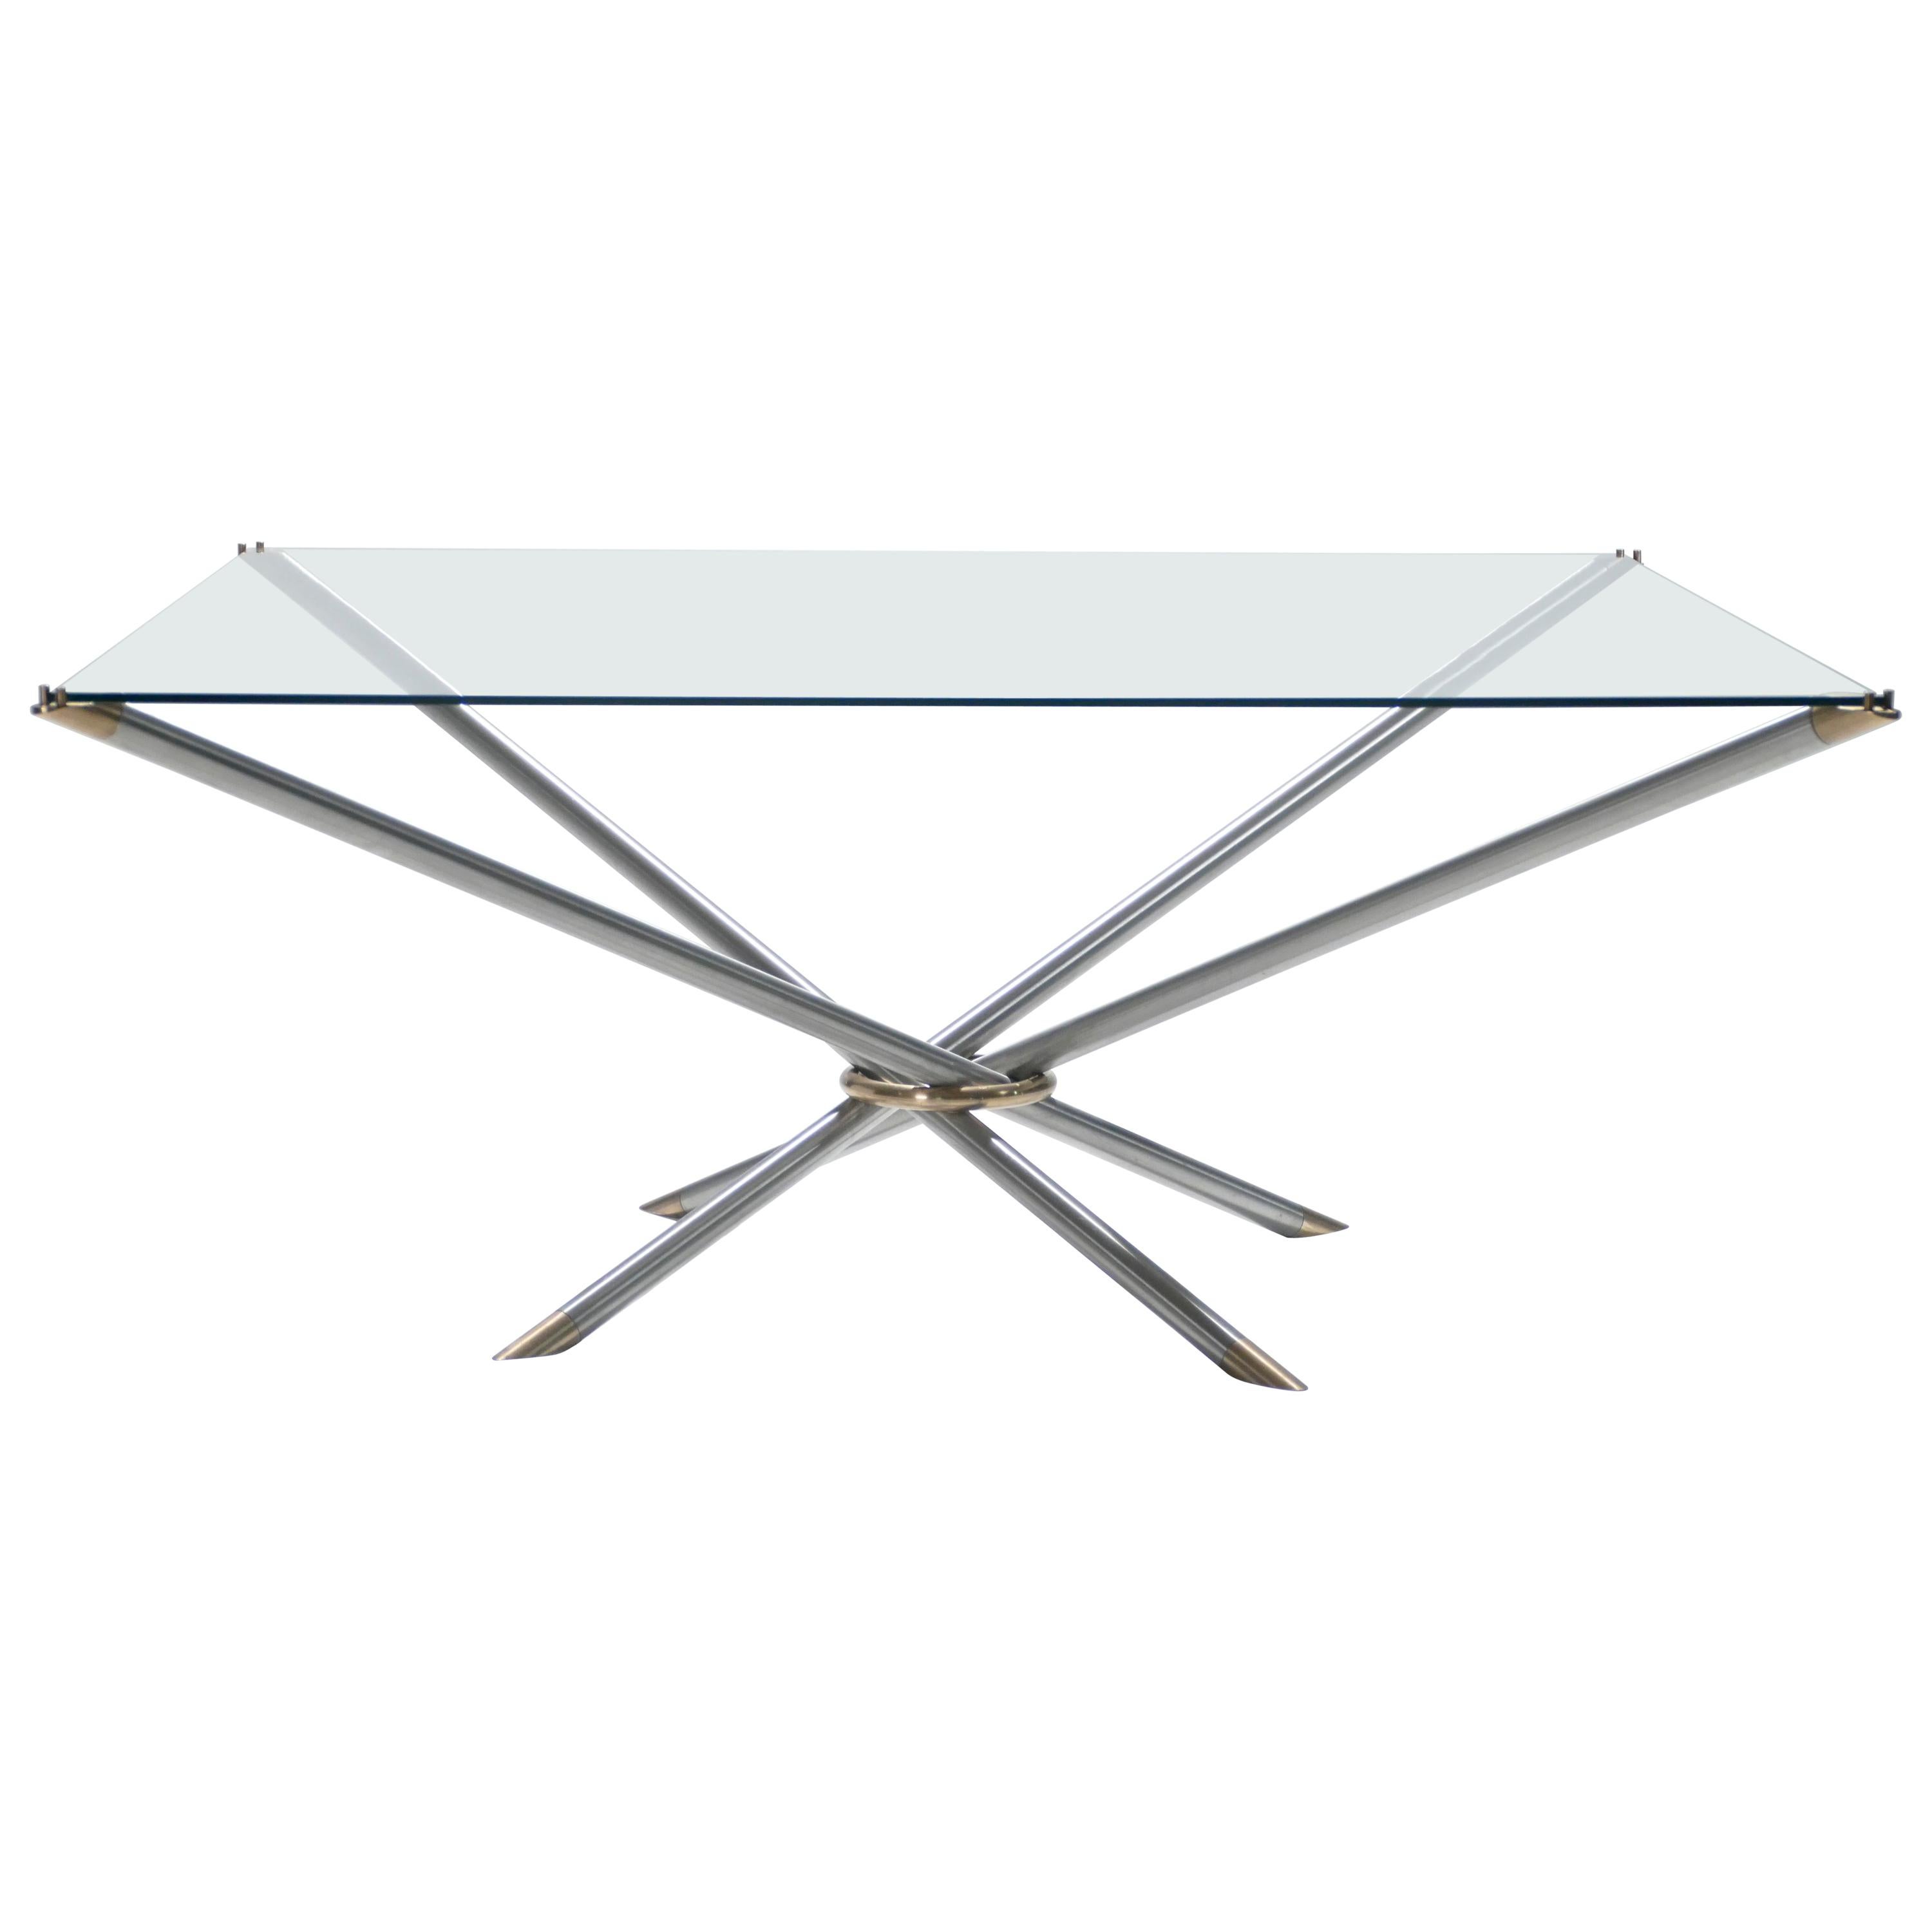 This metal, brass, and glass coffee table has the sleek, yet decadent, look that’s reminiscent of French designer Georges Geffroy. The smooth light metal legs are crossed and kept together with a brass loop, creating an inventive, geometric design